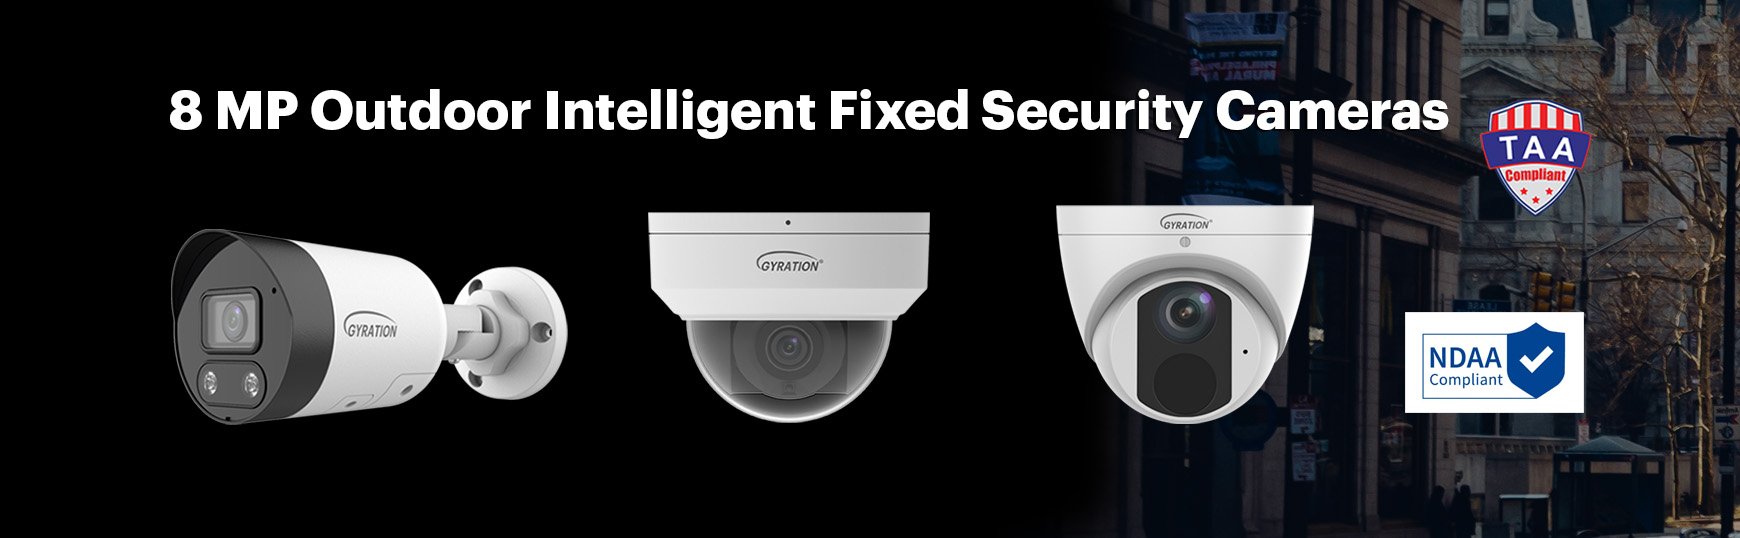 Gyration-Security Camera Banner